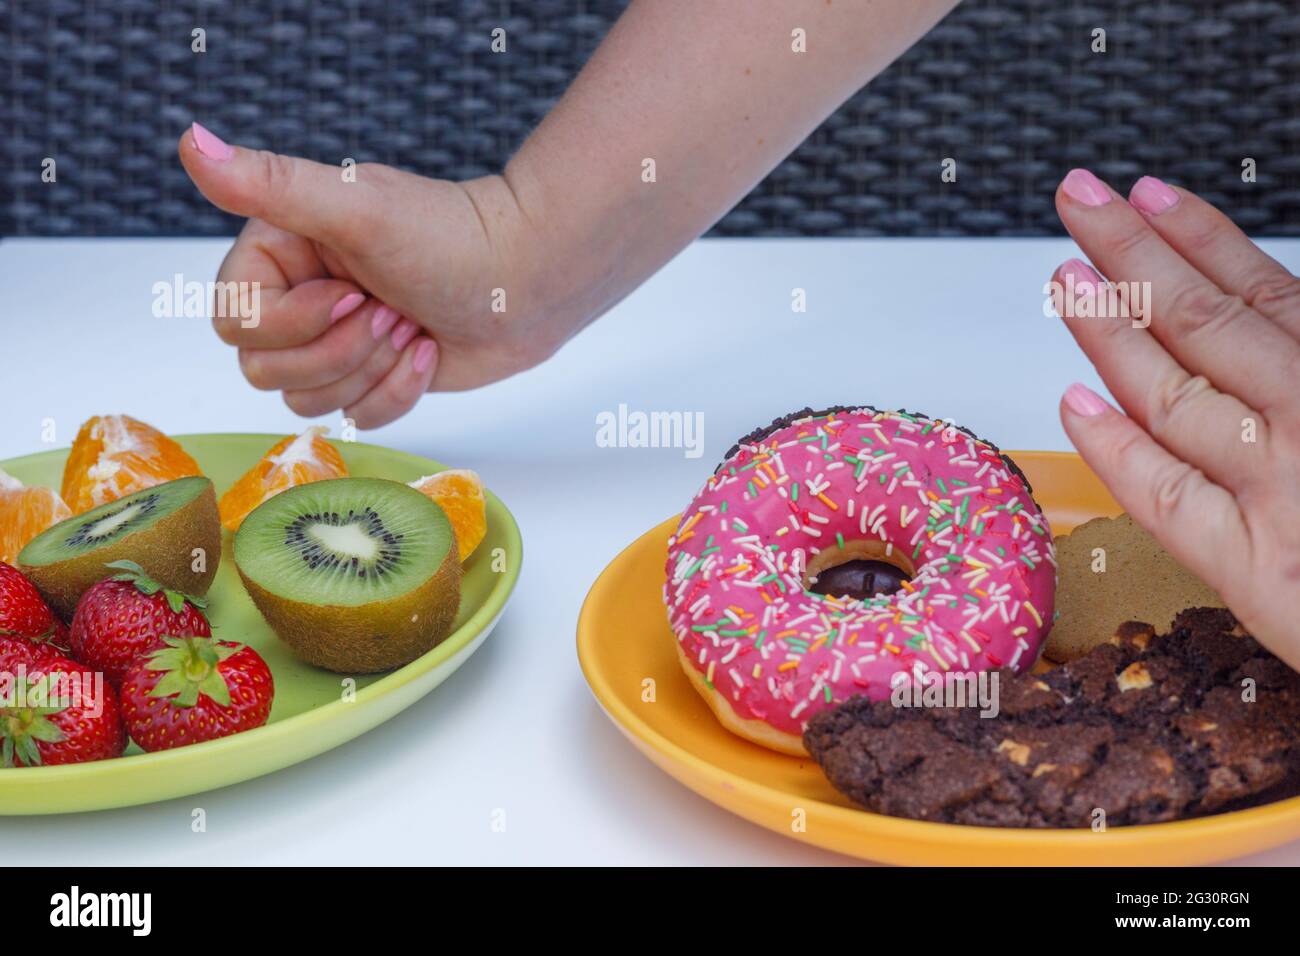 Healthy and unhealthy, Two plates with fruit and cookies, Thumbs up with fruit, Natural food concept Stock Photo